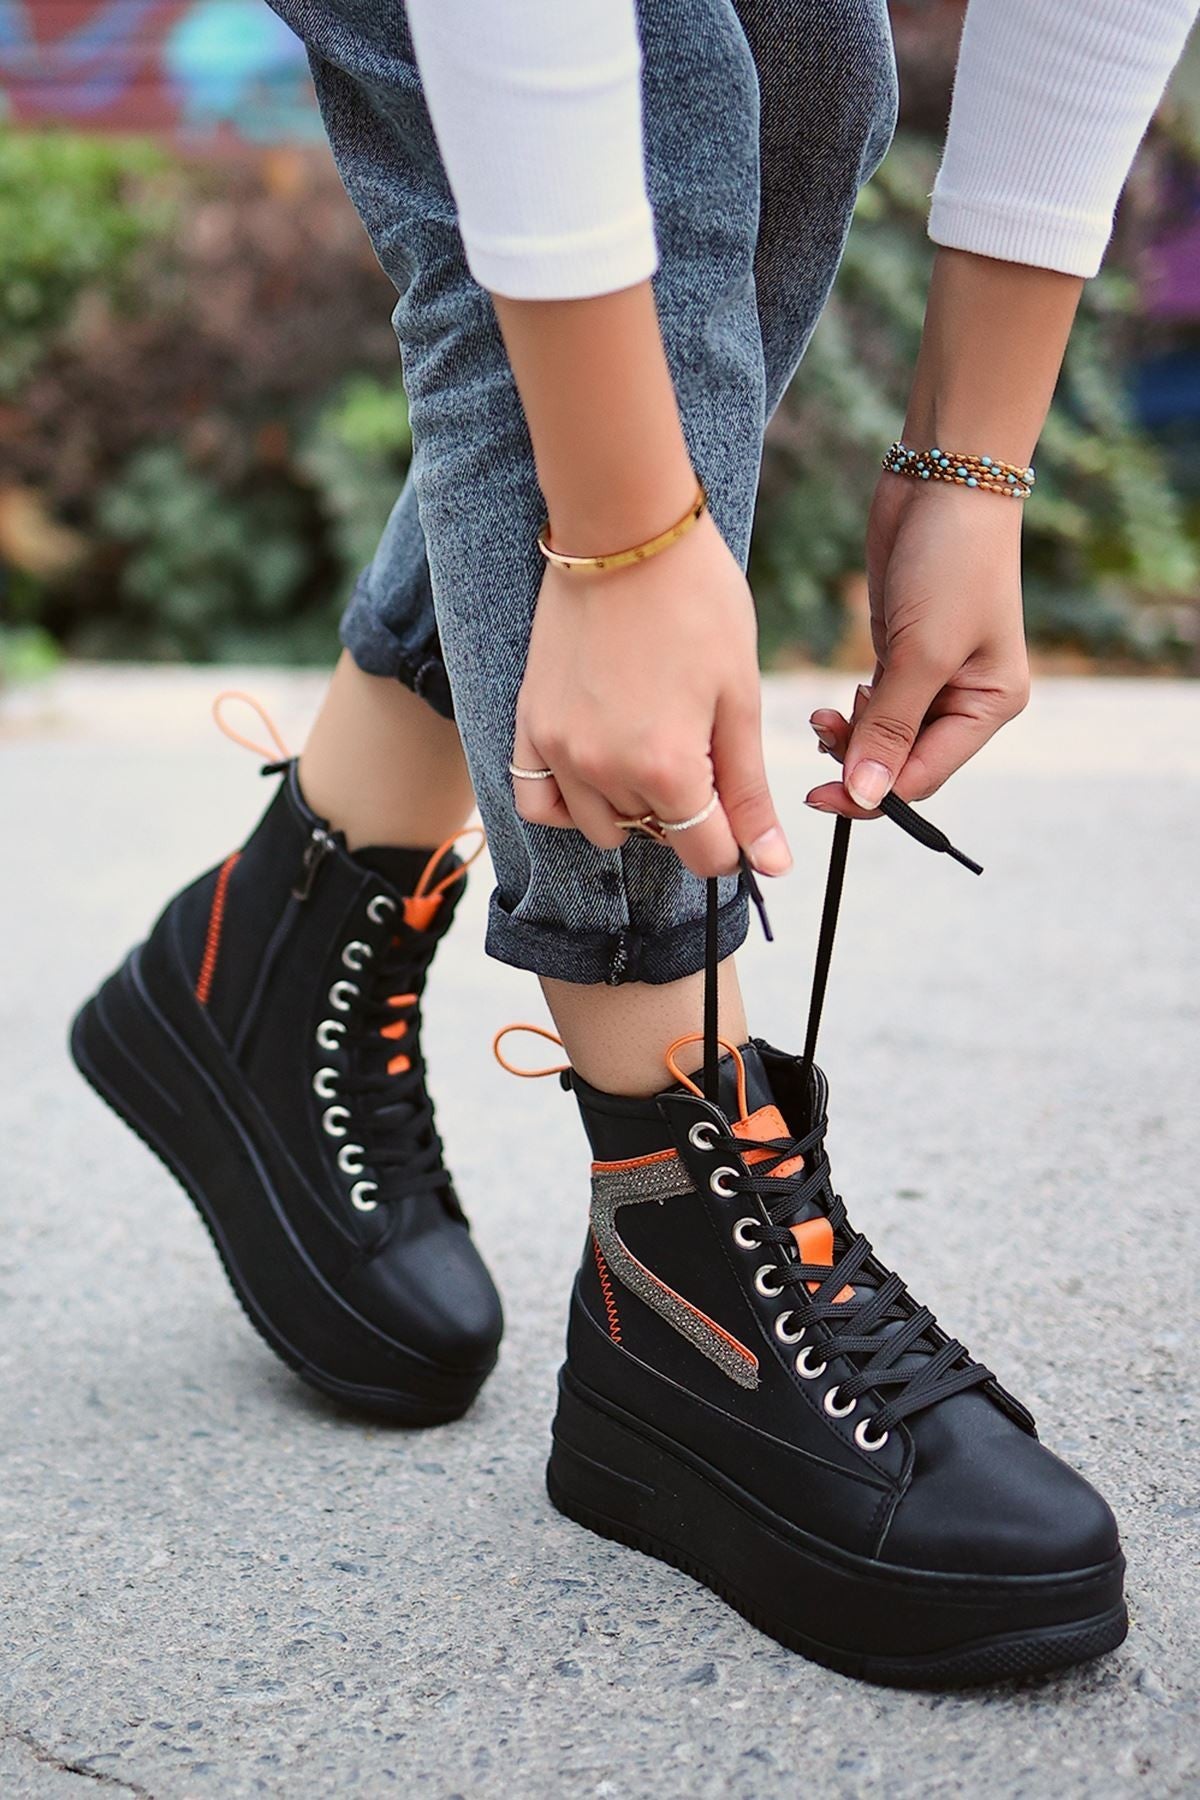 Women's Pone Black Skin Orange Detailed Lace Up Sneakers Boots - STREETMODE™